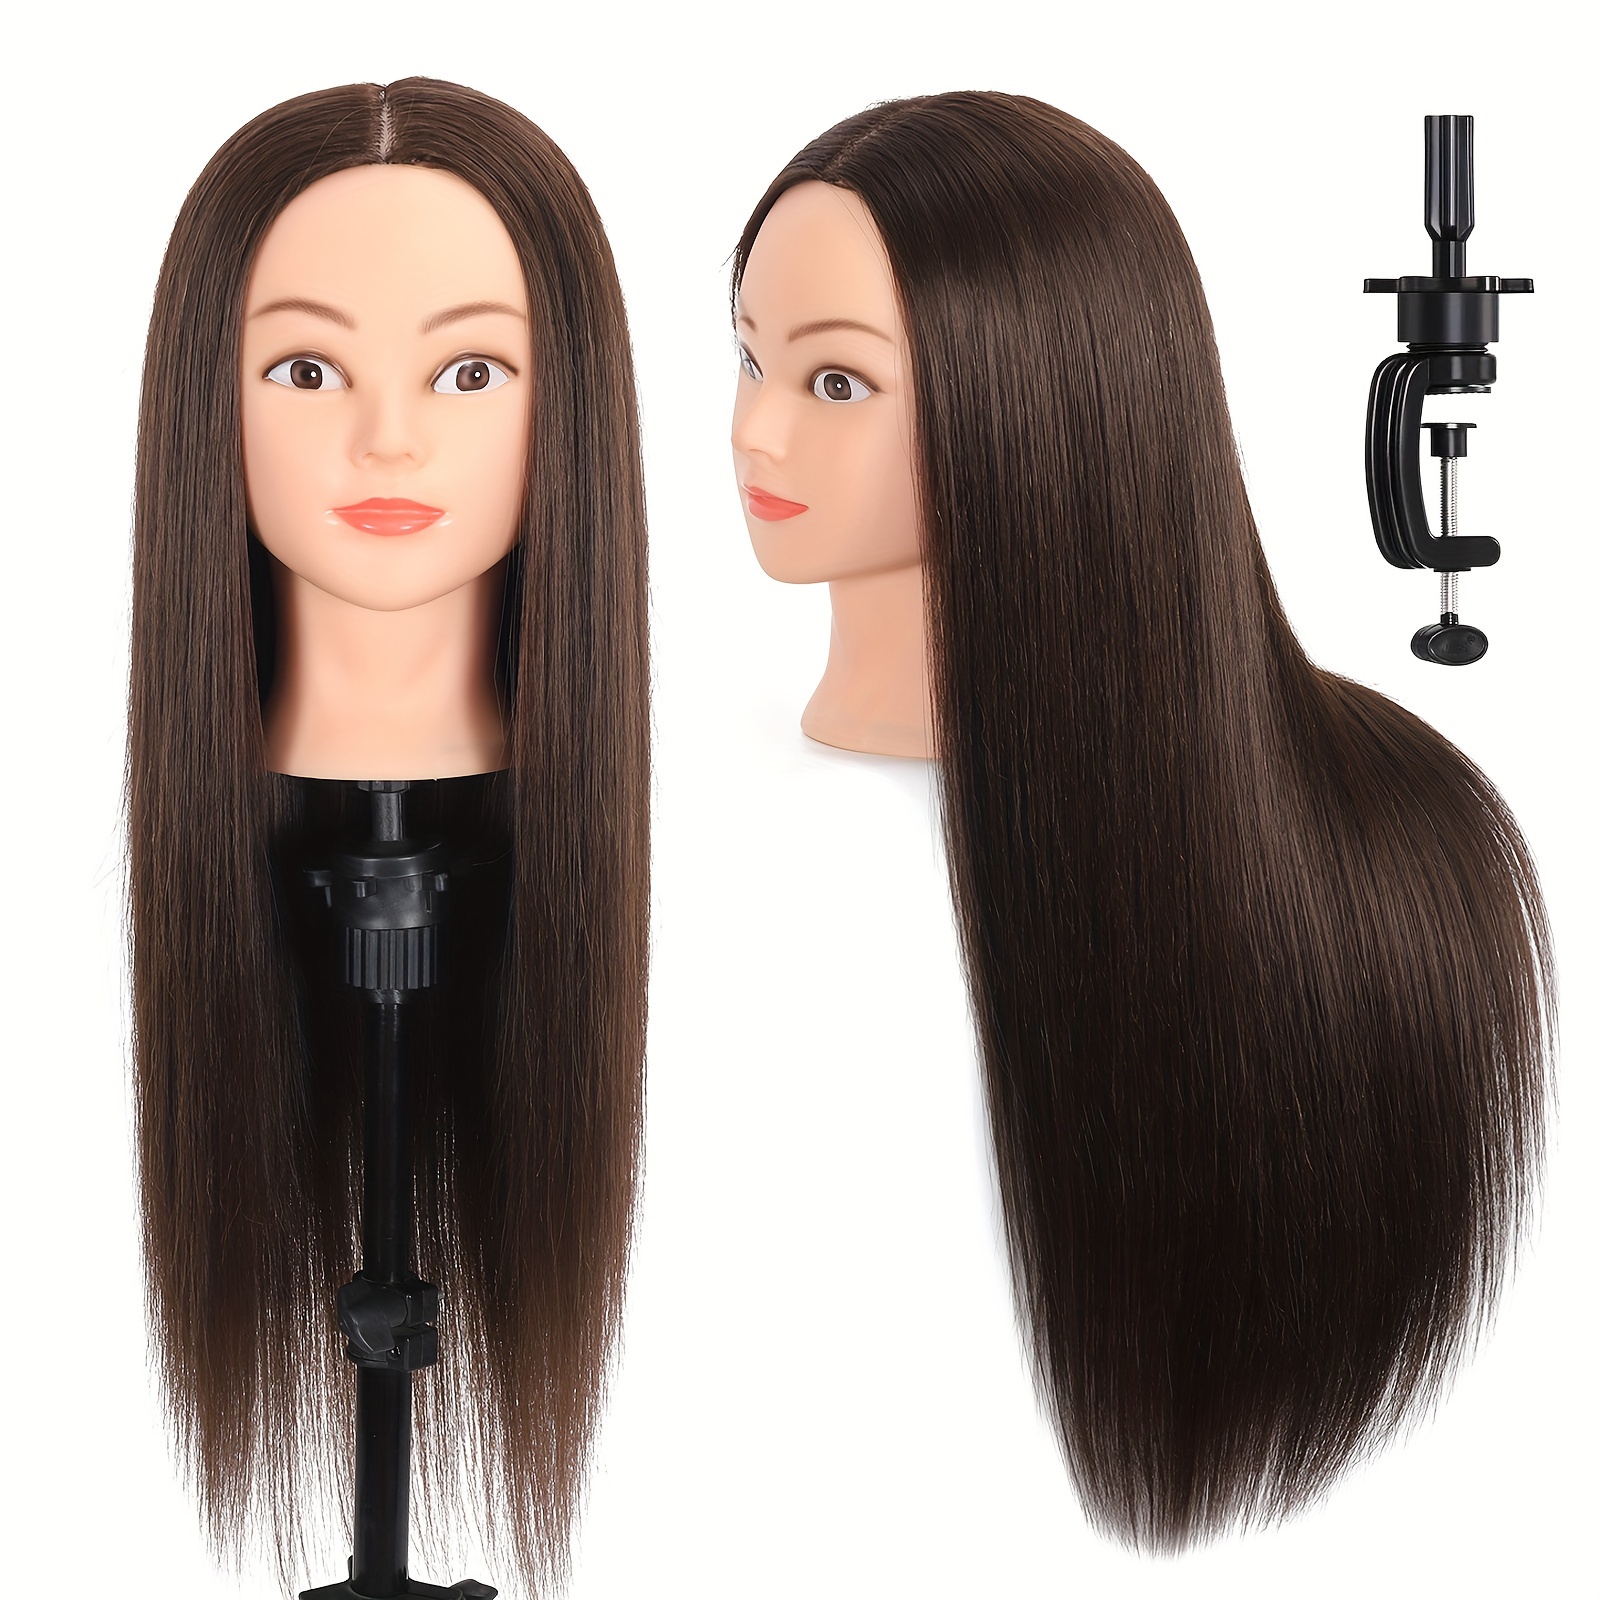 Cosmetology Mannequin Head With 100% Human Hair 18inch Hairdresser Salon  Training Practice Dolls Head For Styling Dye Cutting